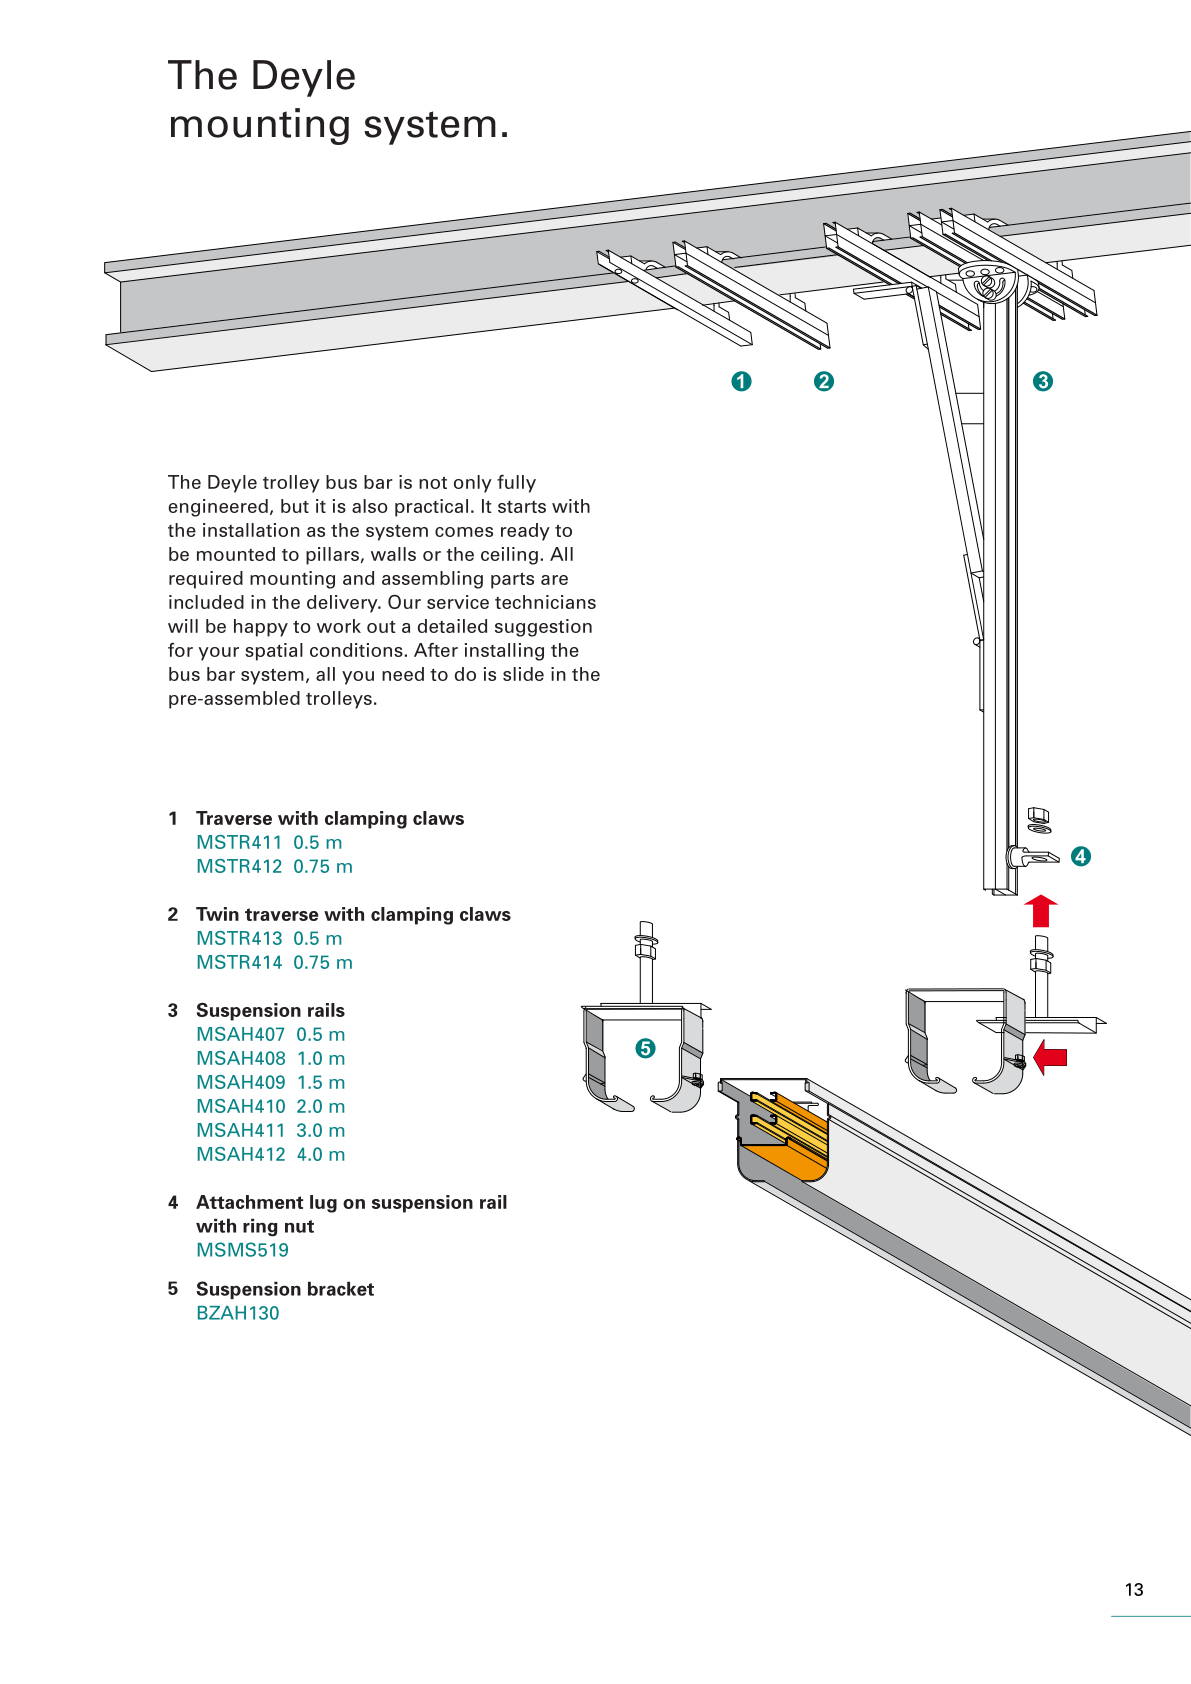 Trolley Bus Bar B product catalogue - page 13